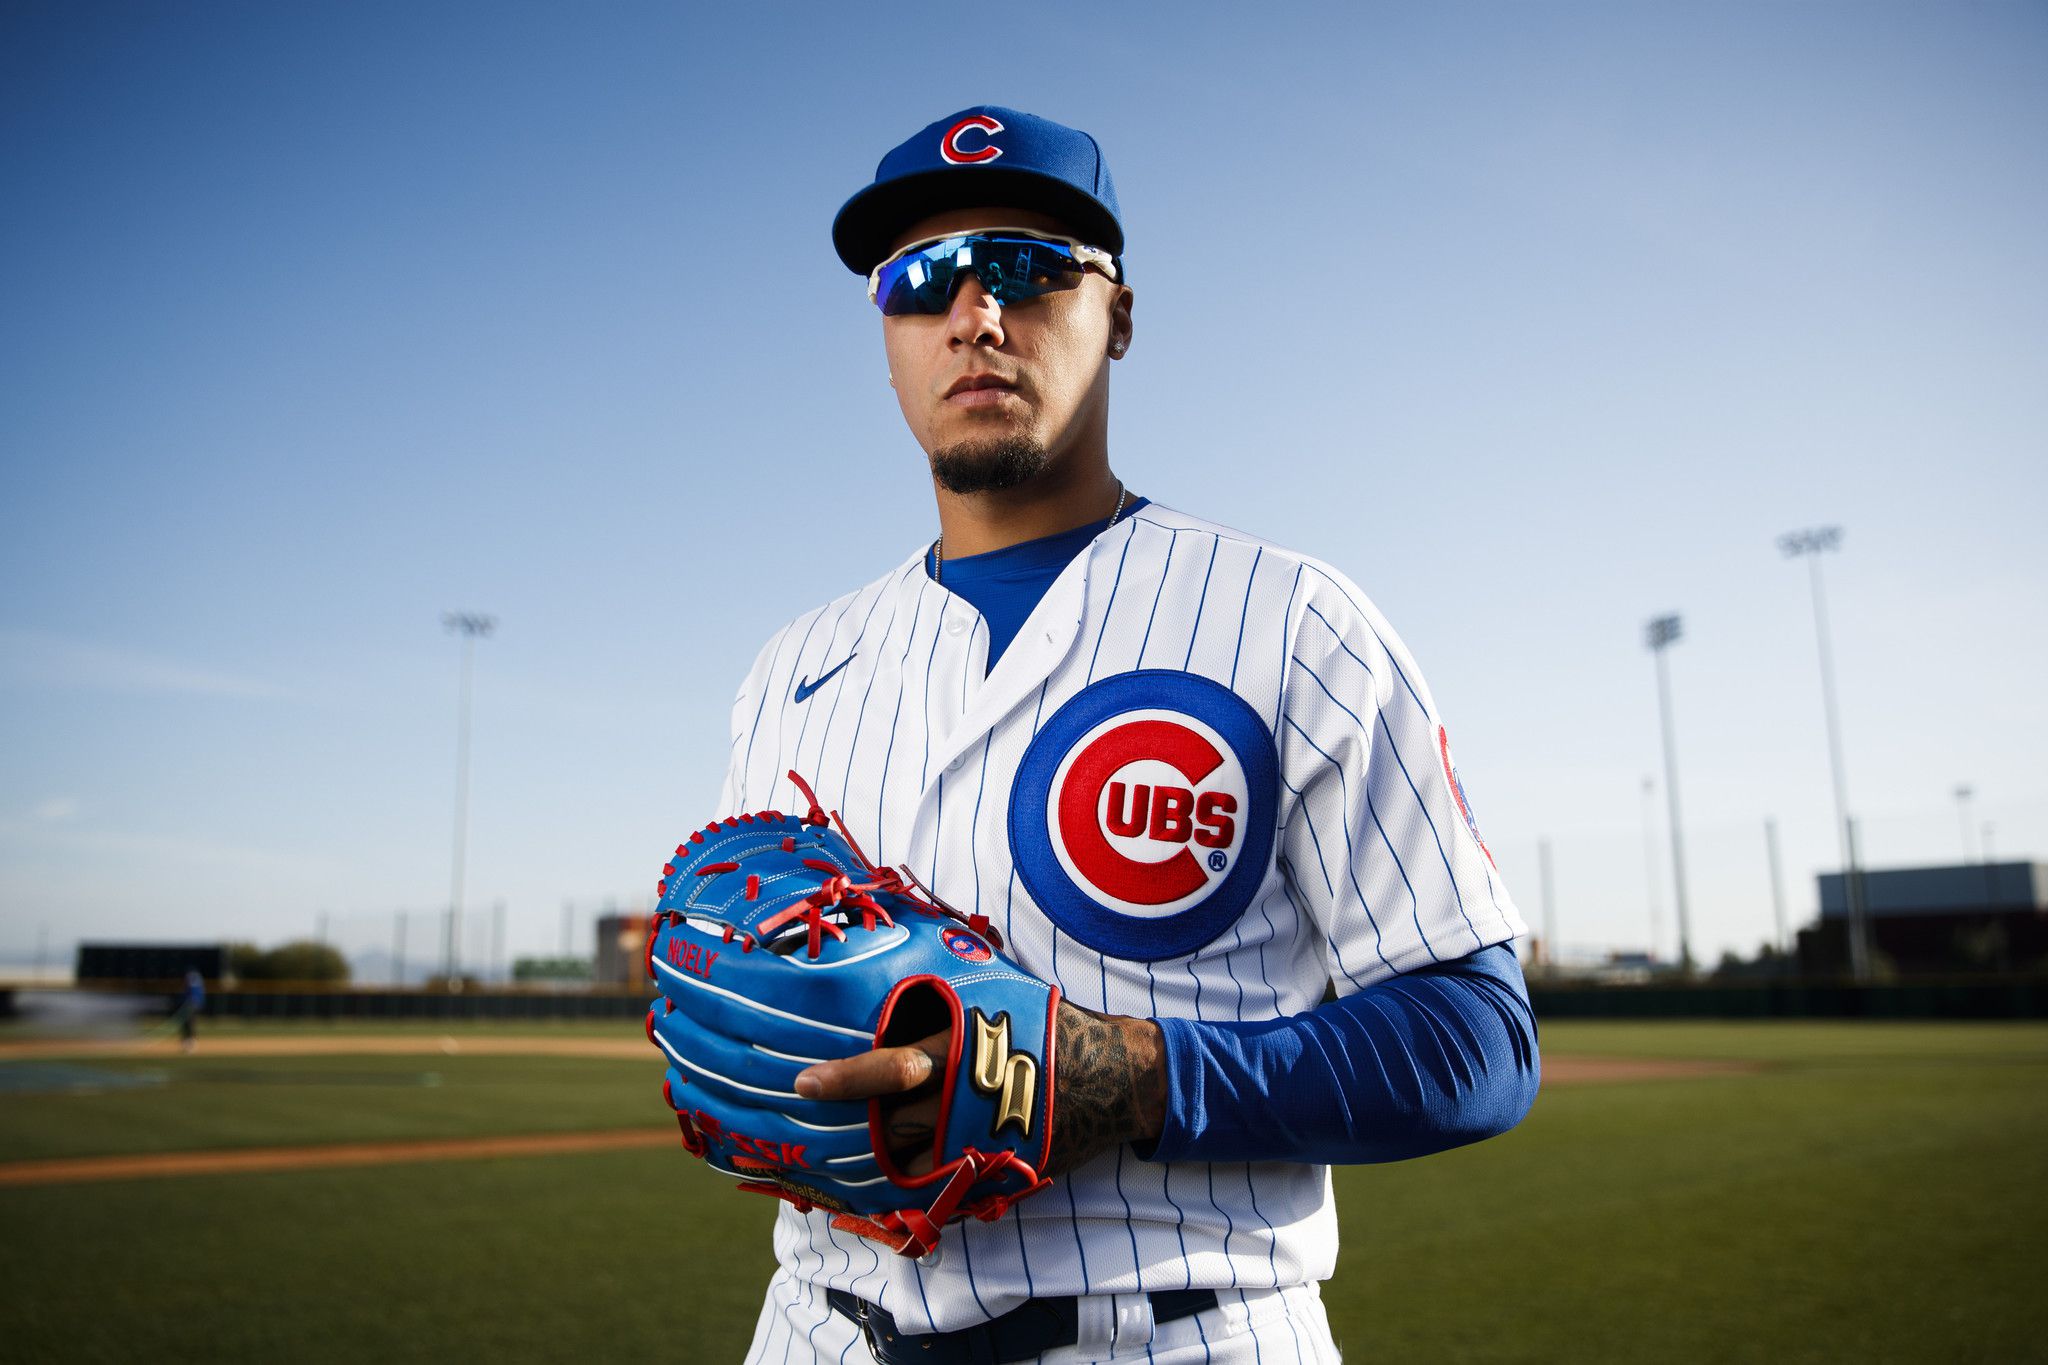 Kris Bryant? Anthony Rizzo? No consensus on Home Run Derby favorite